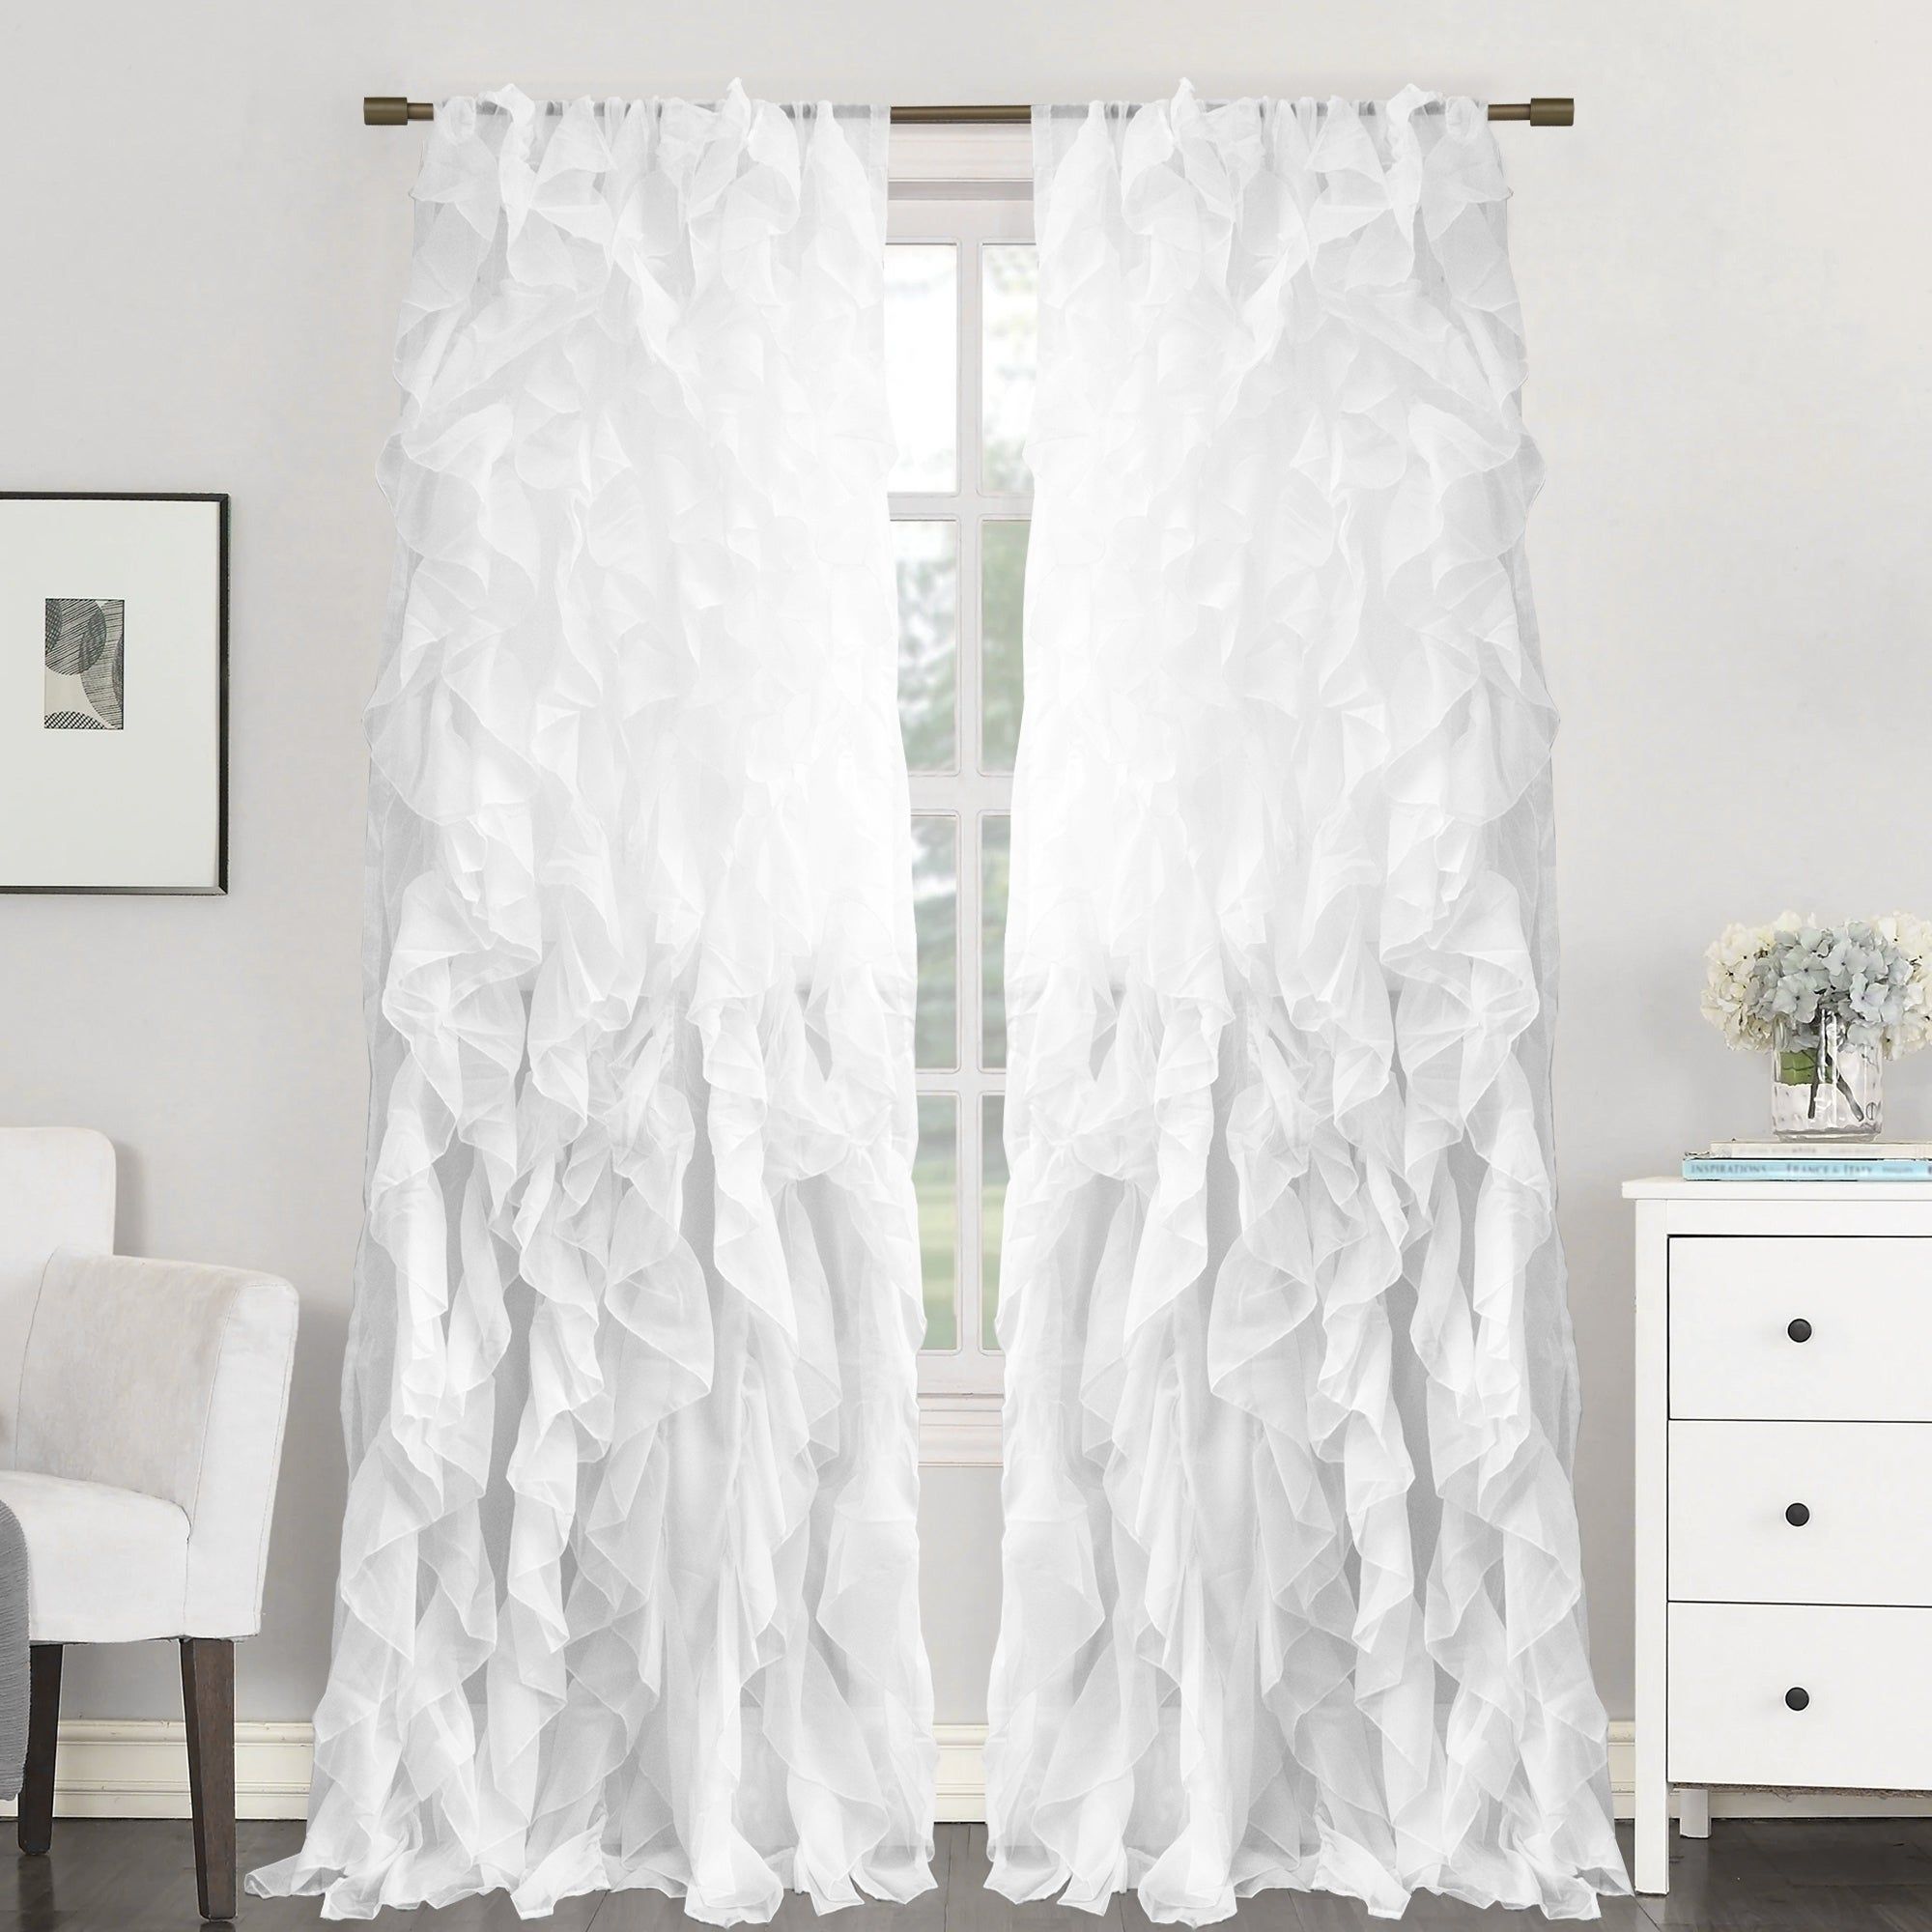 Sweet Home Collection Sheer Voile Waterfall Ruffled Tier 96 Inch Single  Curtain Panel – 96" Long X 50" Wide Pertaining To Sheer Voile Waterfall Ruffled Tier Single Curtain Panels (View 1 of 20)